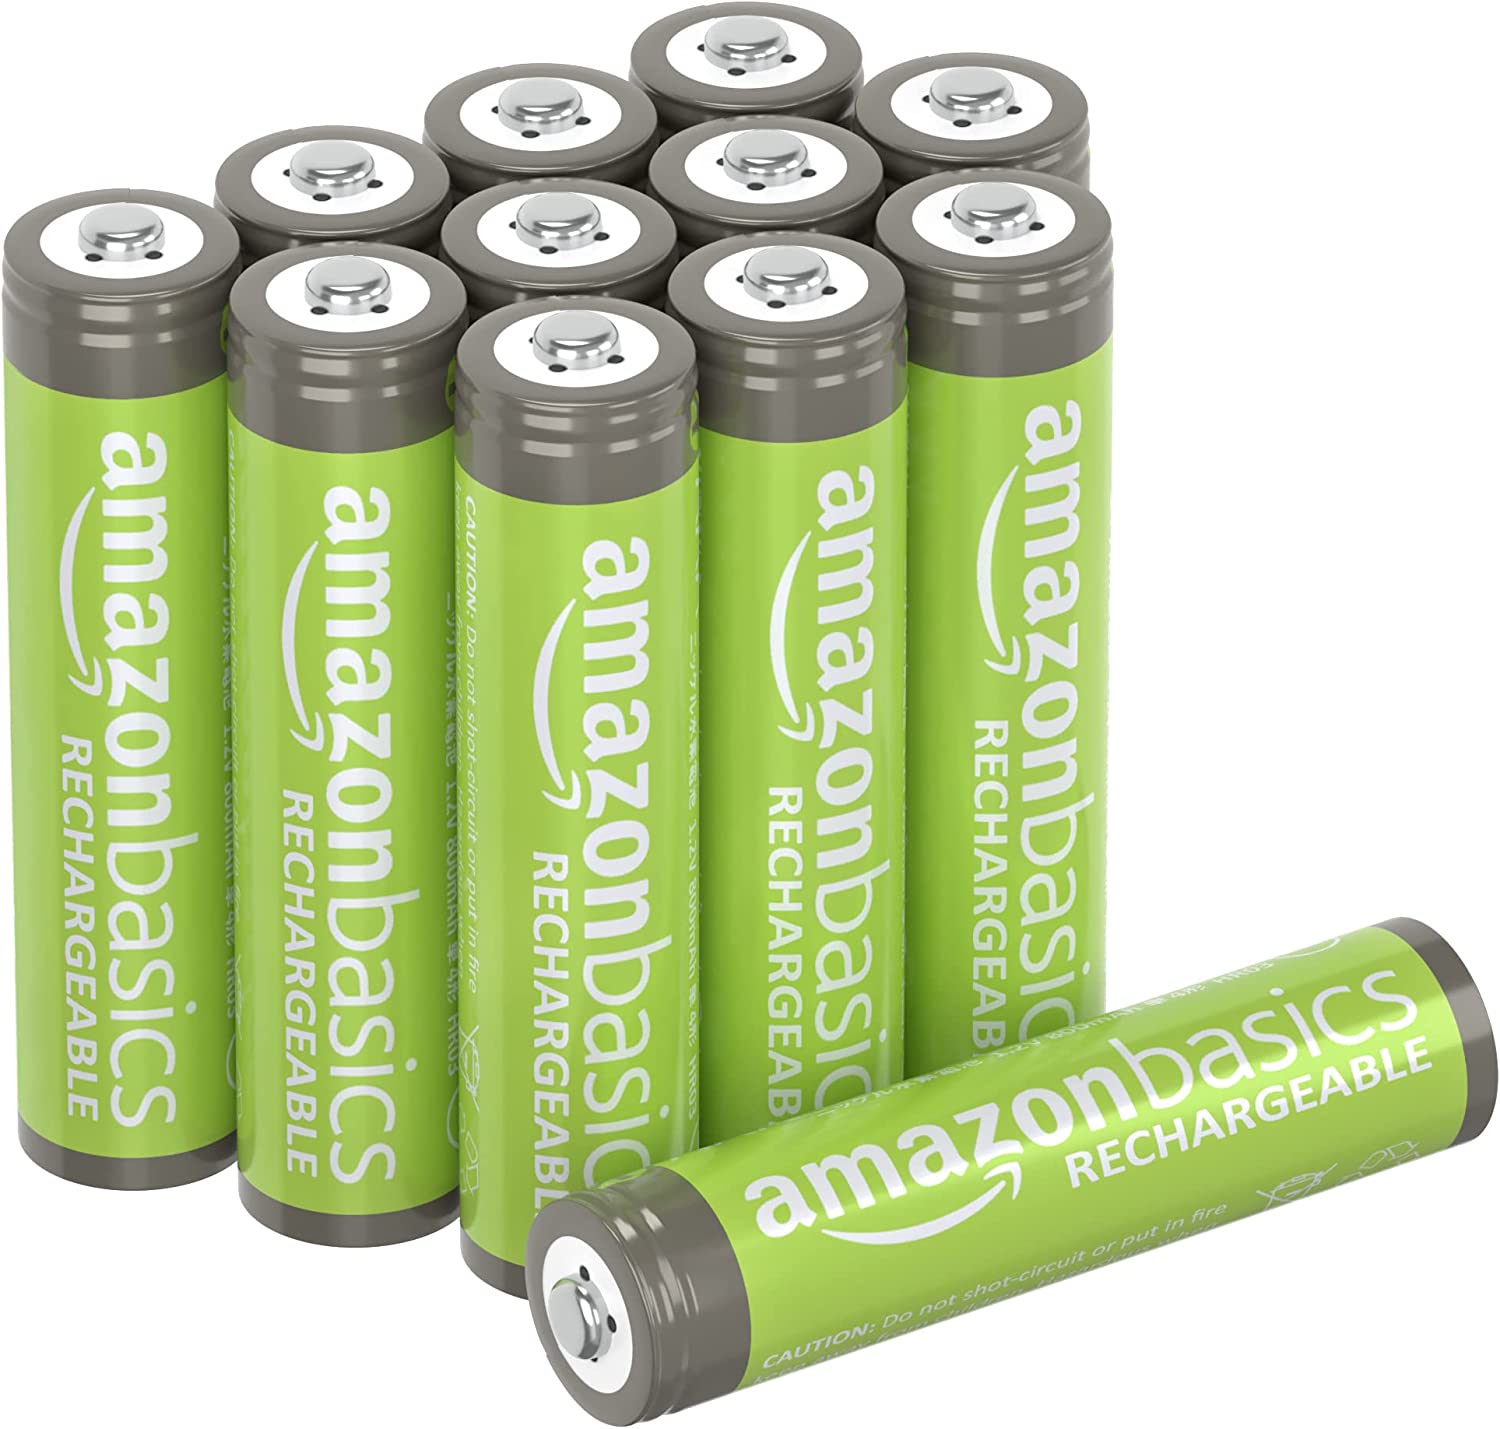 Amazon Basics AAA Pre-Charged Rechargeable 800 mAh Batteries: 12-Pack $8.85, 24-Pack $15.25 w/ S&S + Free Shipping w/ Prime or on $25+